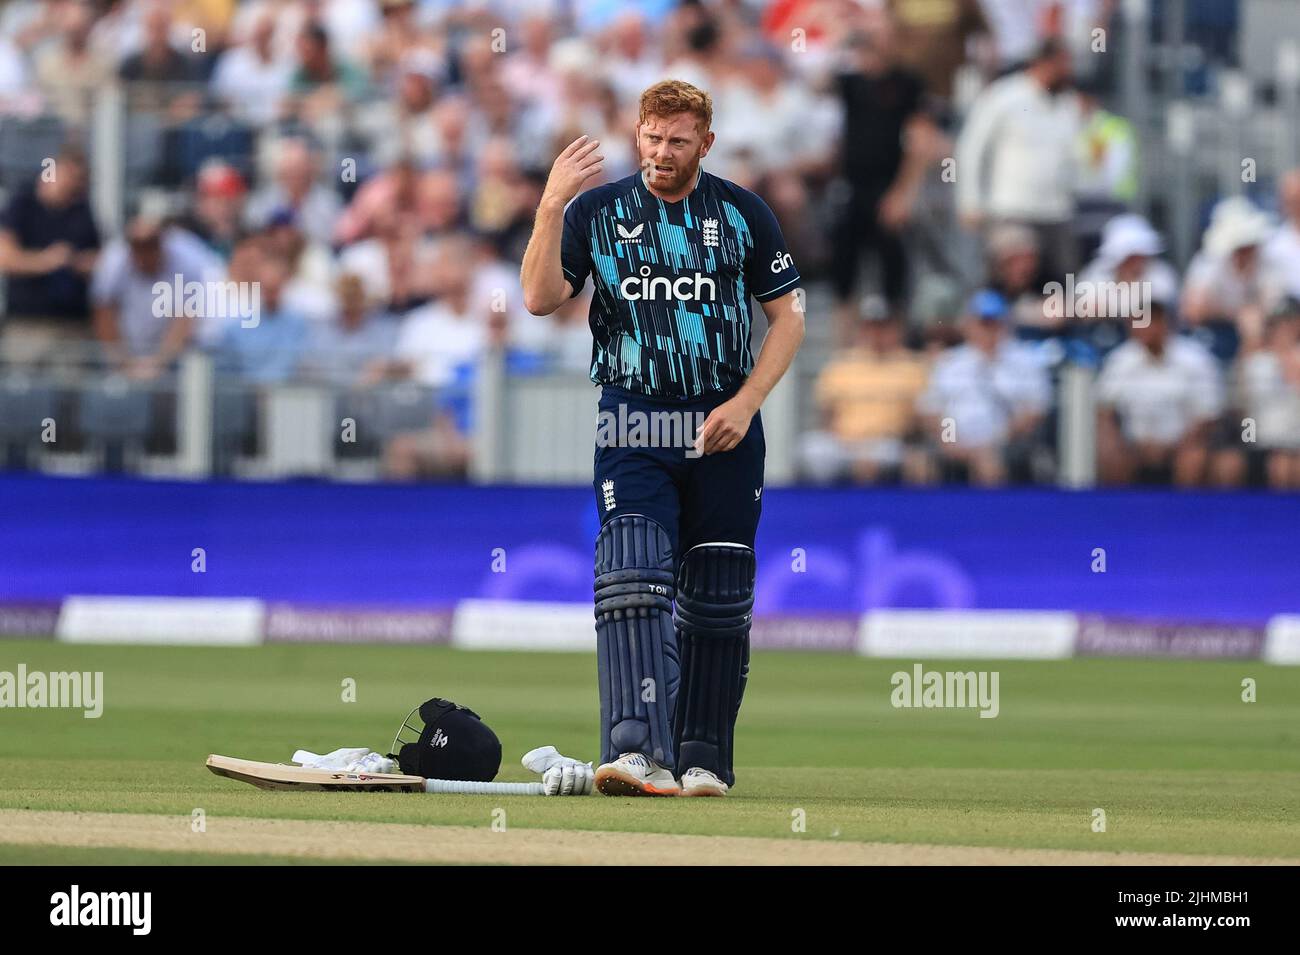 Jonny Bairstow of England calls for the physio after he struggles with cramp Stock Photo